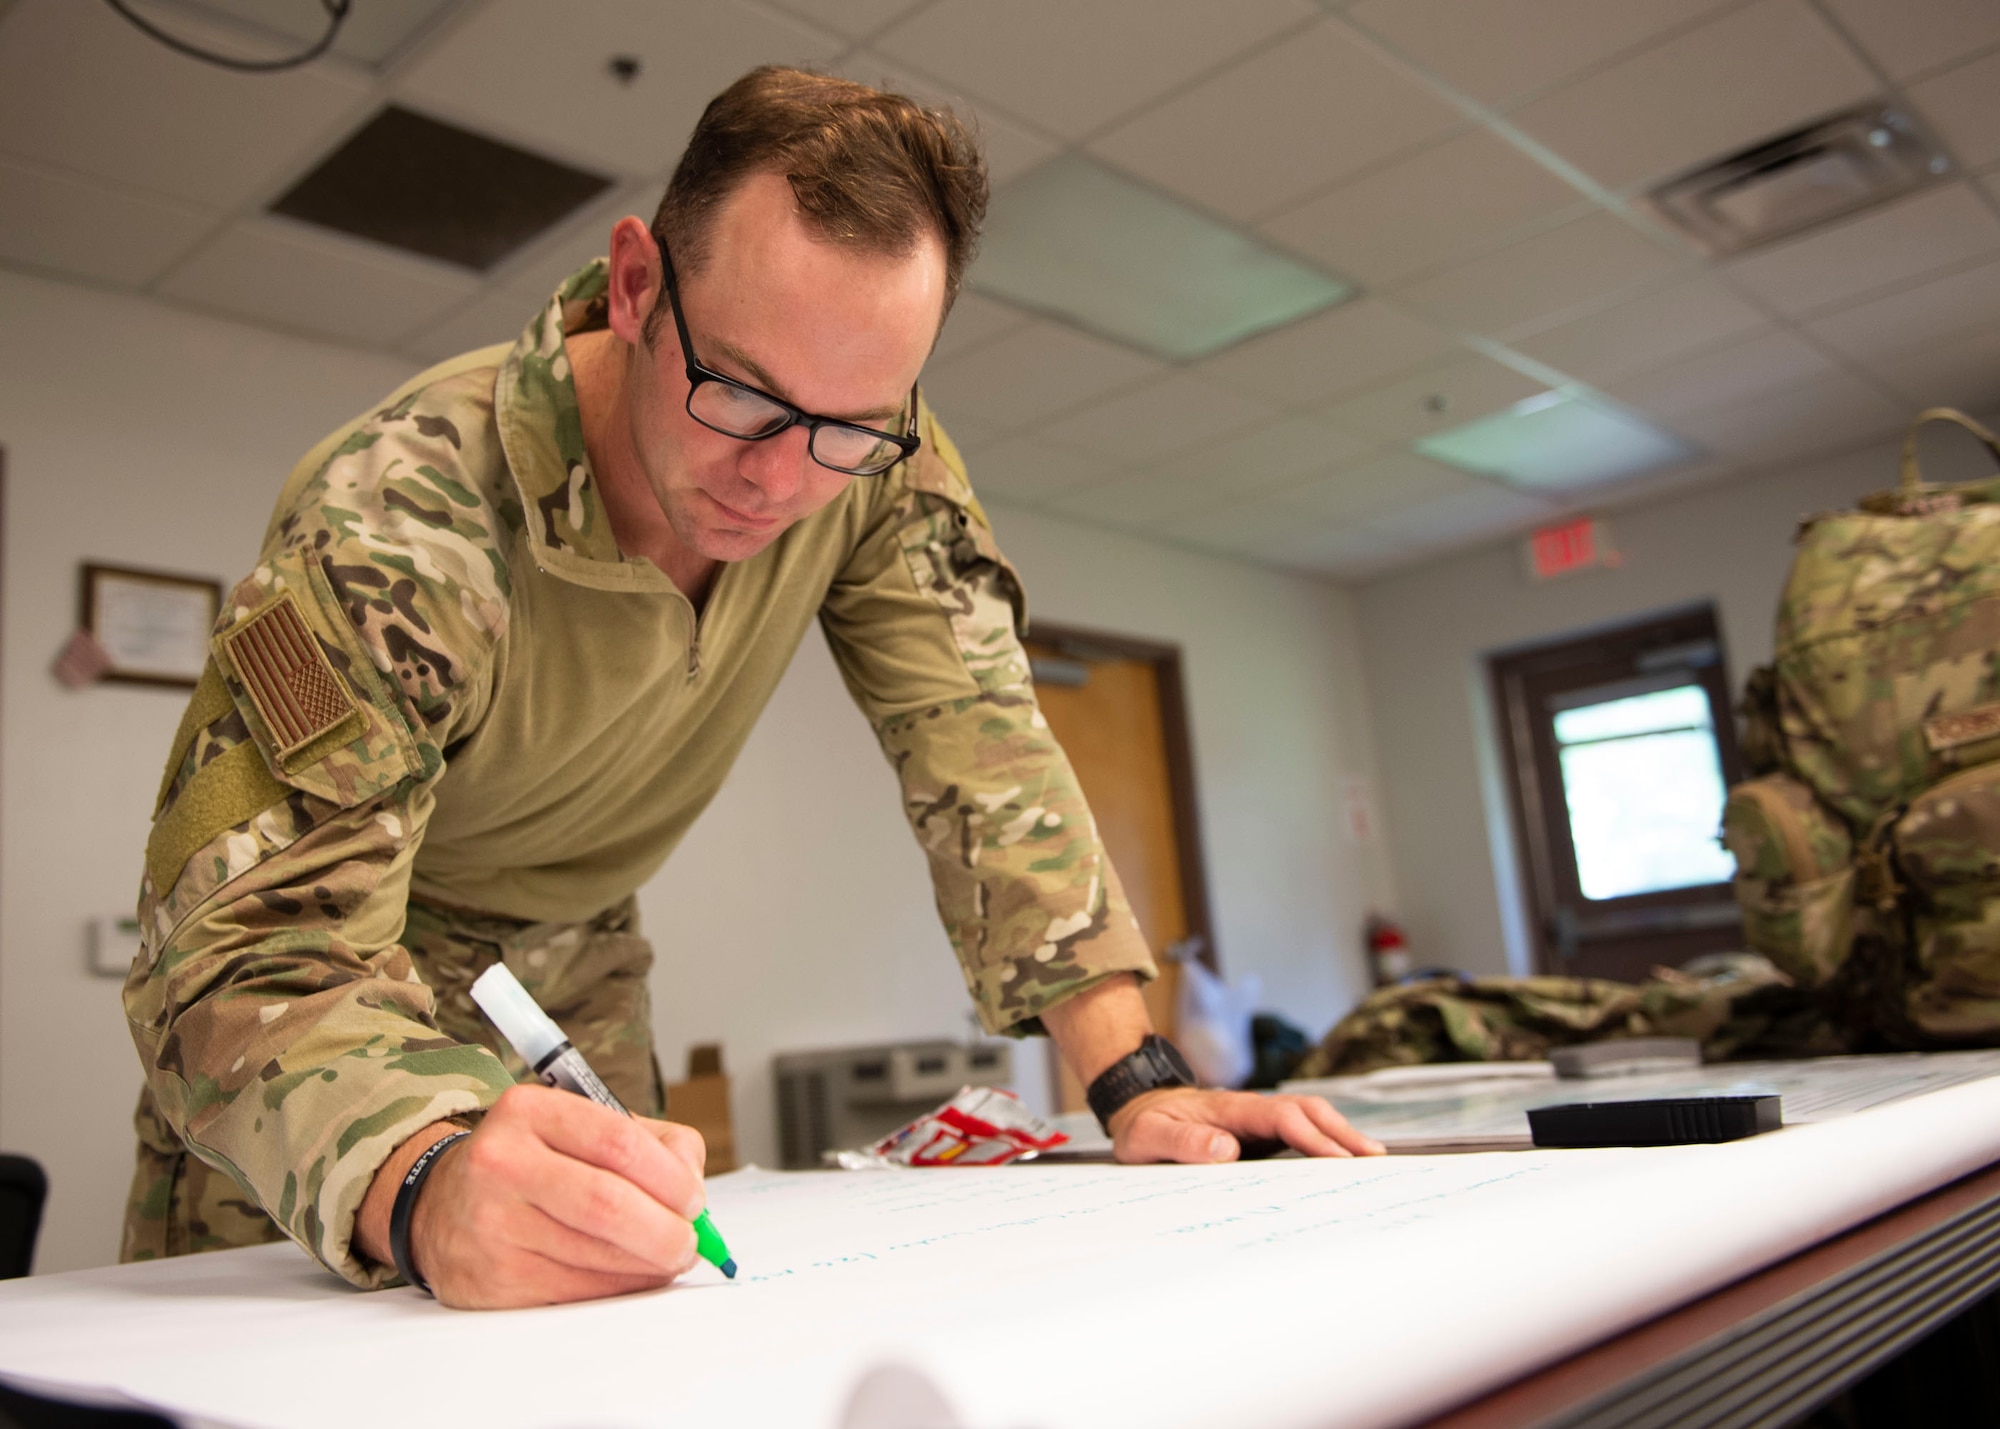 Staff Sgt. Neil Stuart, 824th Base Defense Squadron squad leader, writes down training exercise plans during the Tactical Leaders Course, Aug. 10, 2019, at Moody Air Force Base, Ga. The 7-day course revolved around squad leaders developing their skills to effectively communicate, team build and mission plan. These skills were assessed during a 36-hour simulated operation where squad leaders lead Airmen through tactical situations. (U.S. Air Force photo by Airman Azaria E. Foster)